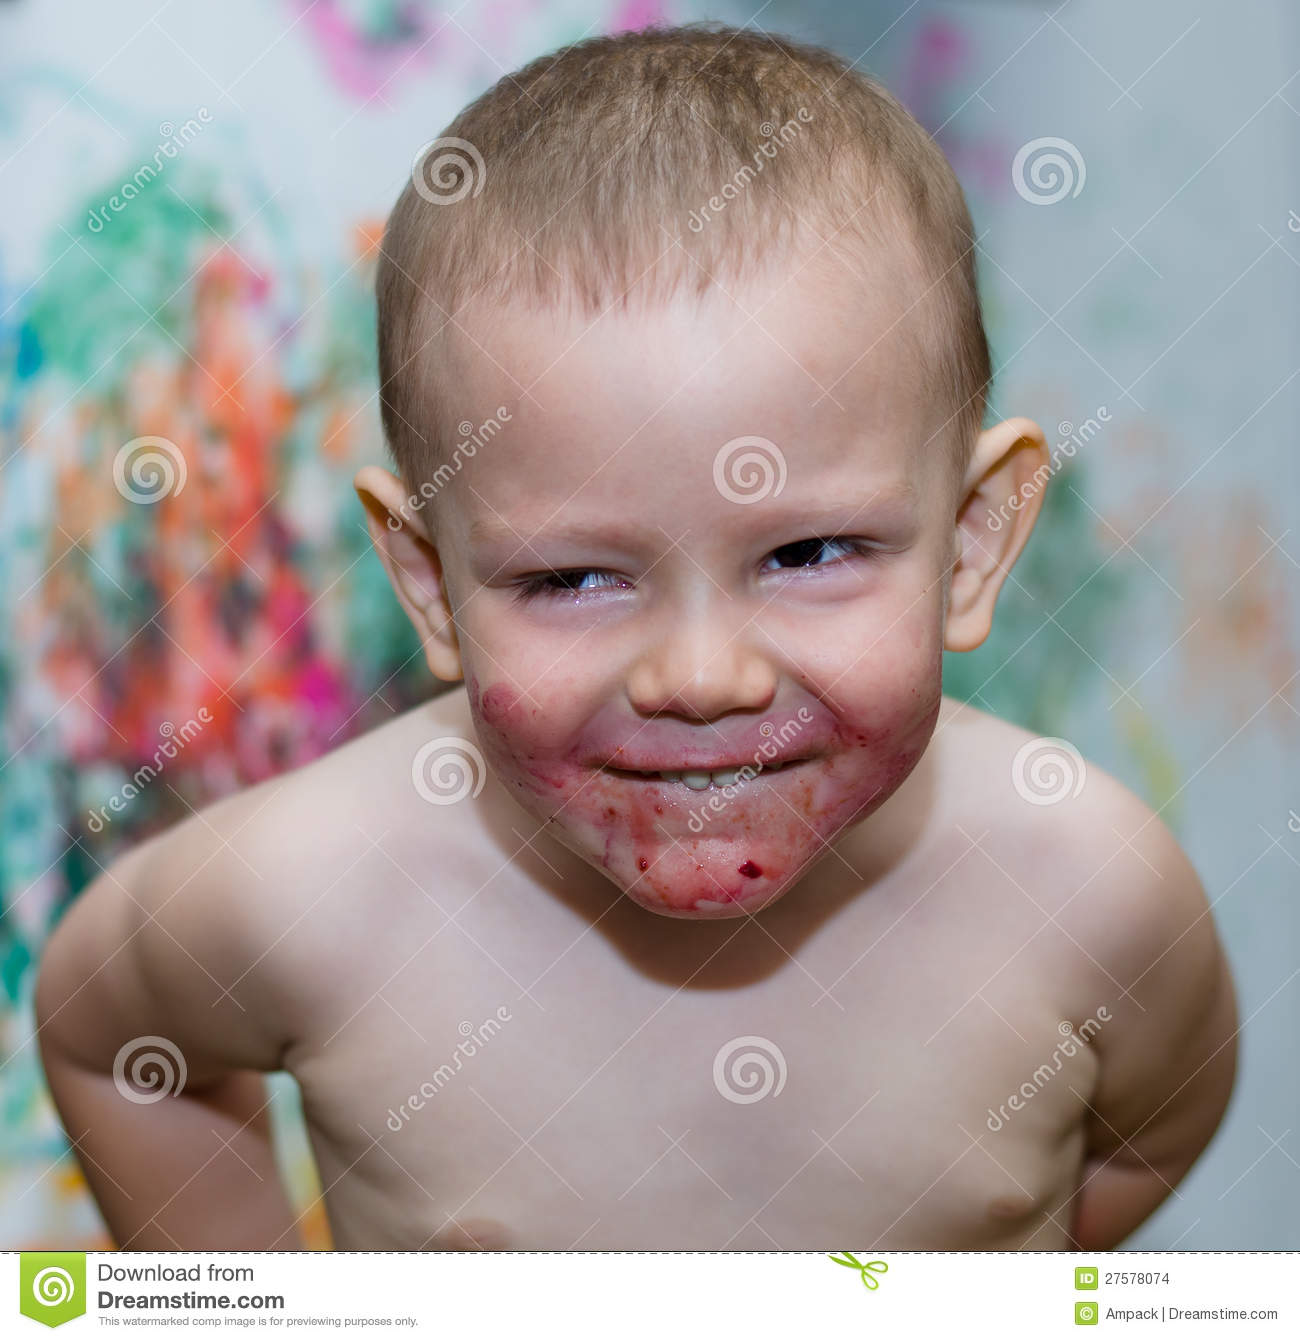 Boy With A Sheepish Grin And A Face Stained Red With Food Or Fruit